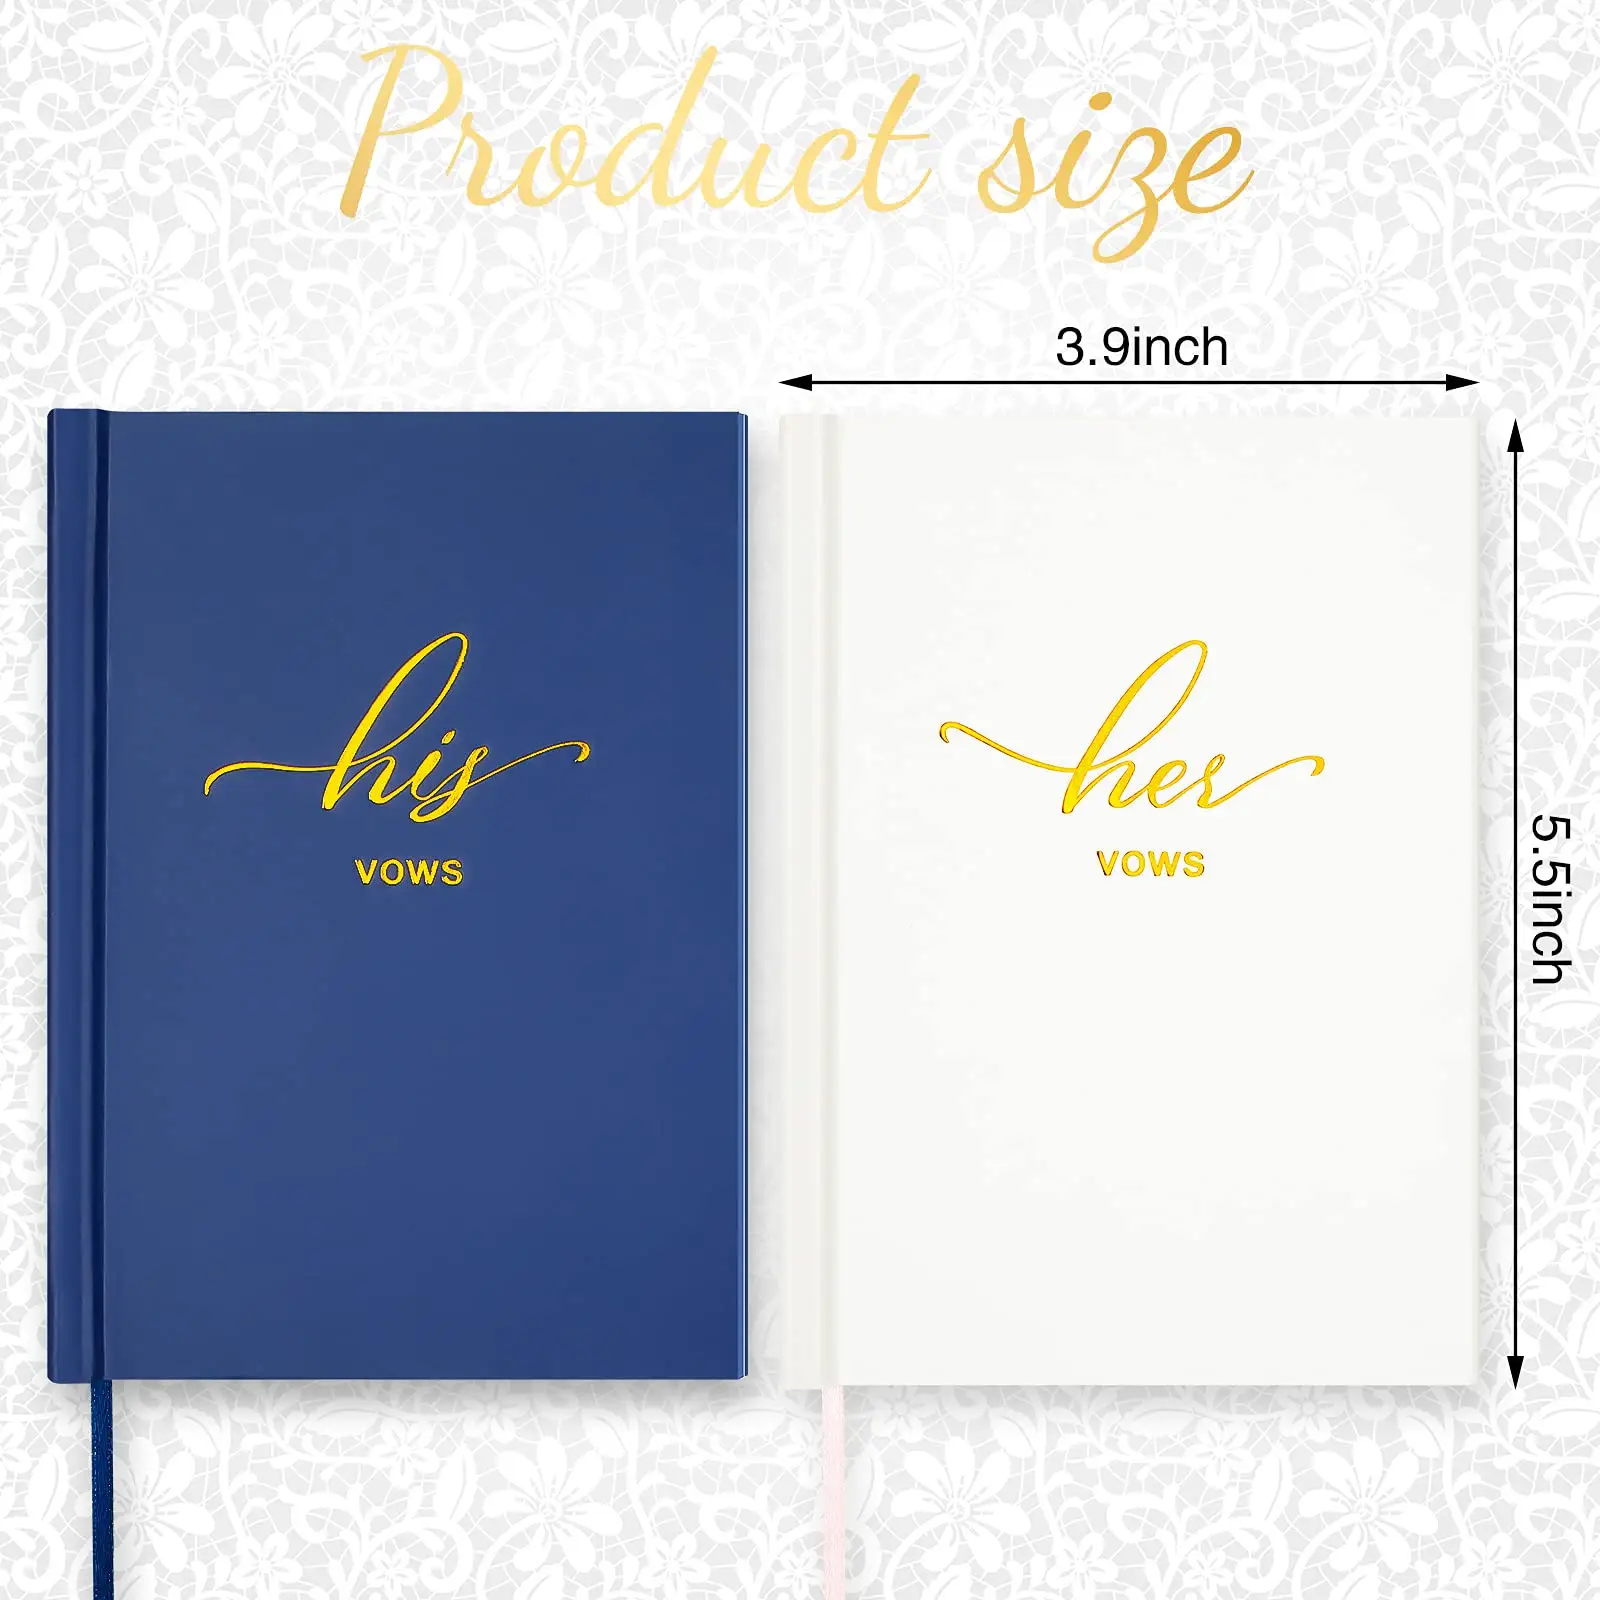 Custom Luxury Linen Cover White and Navy Lovely Wedding His Her Vow Books Journal With Glided Edges For Wedding